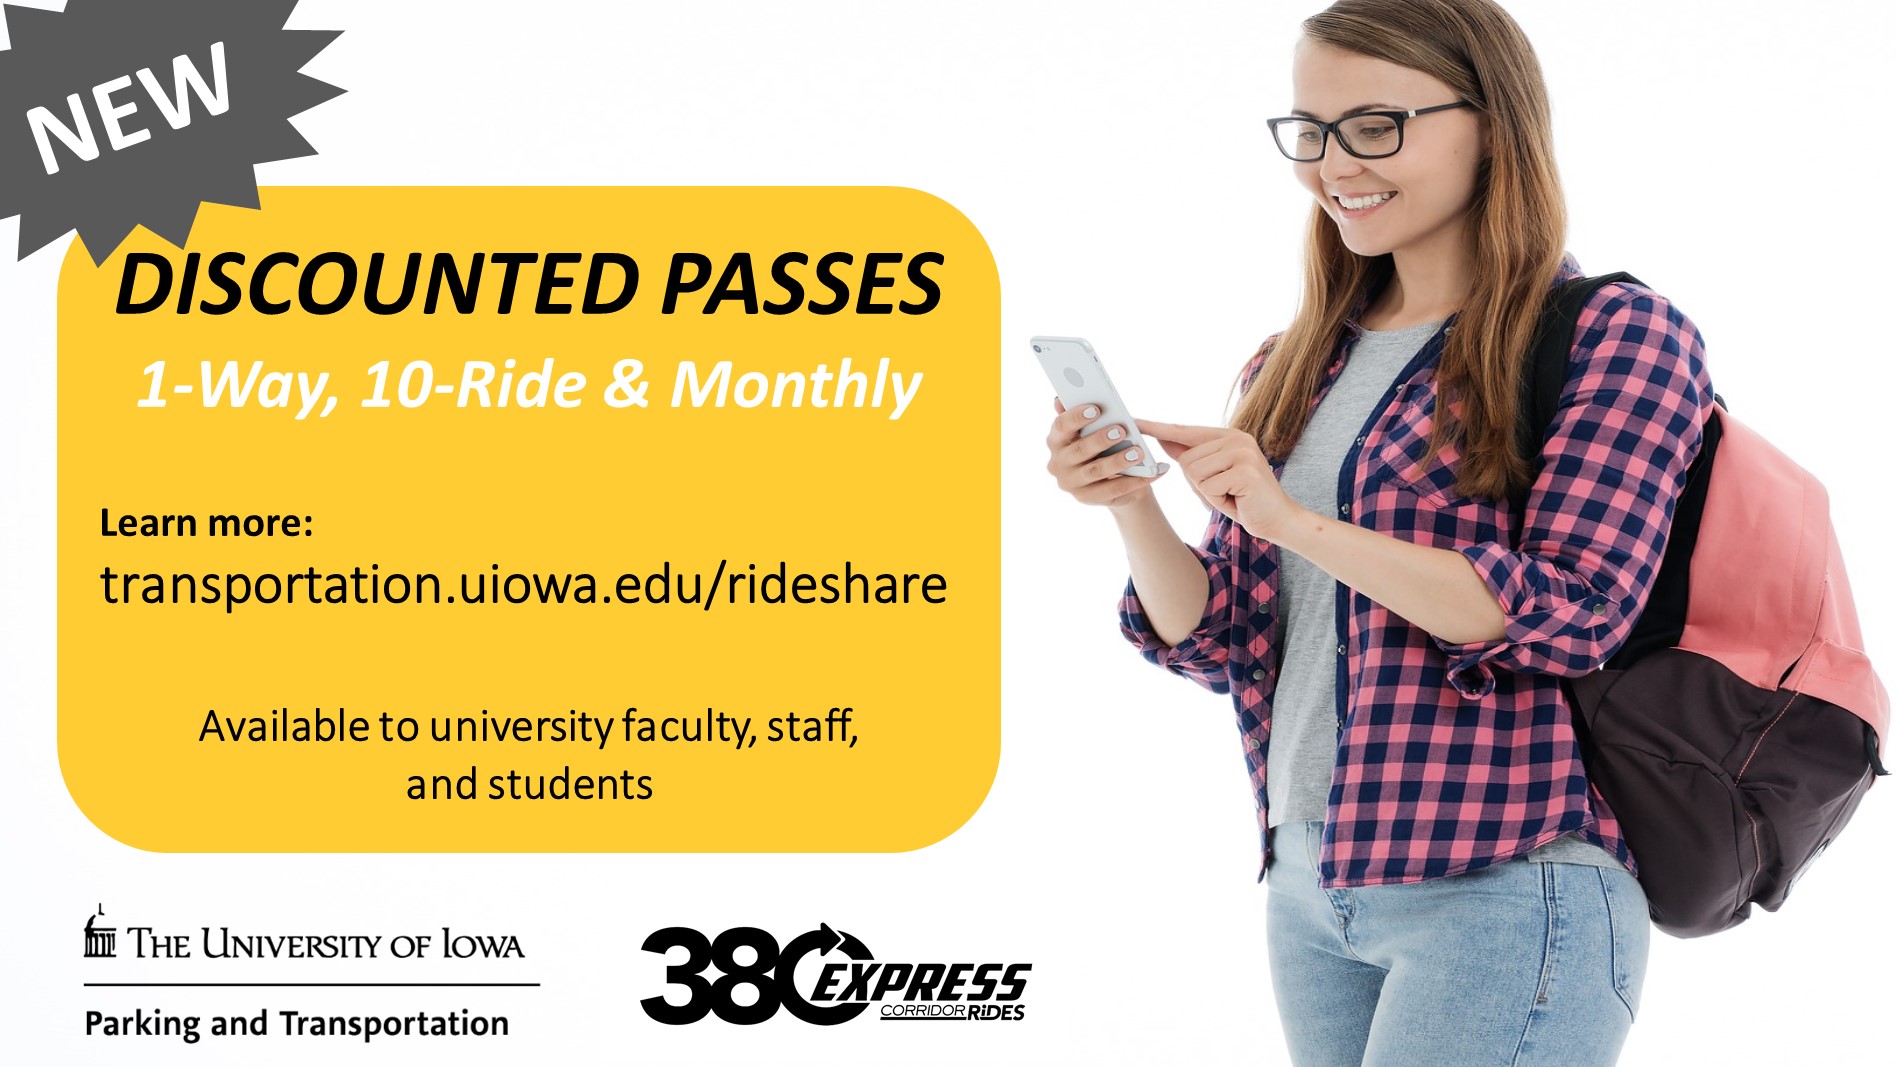 University discounted passes on 380 Express bus